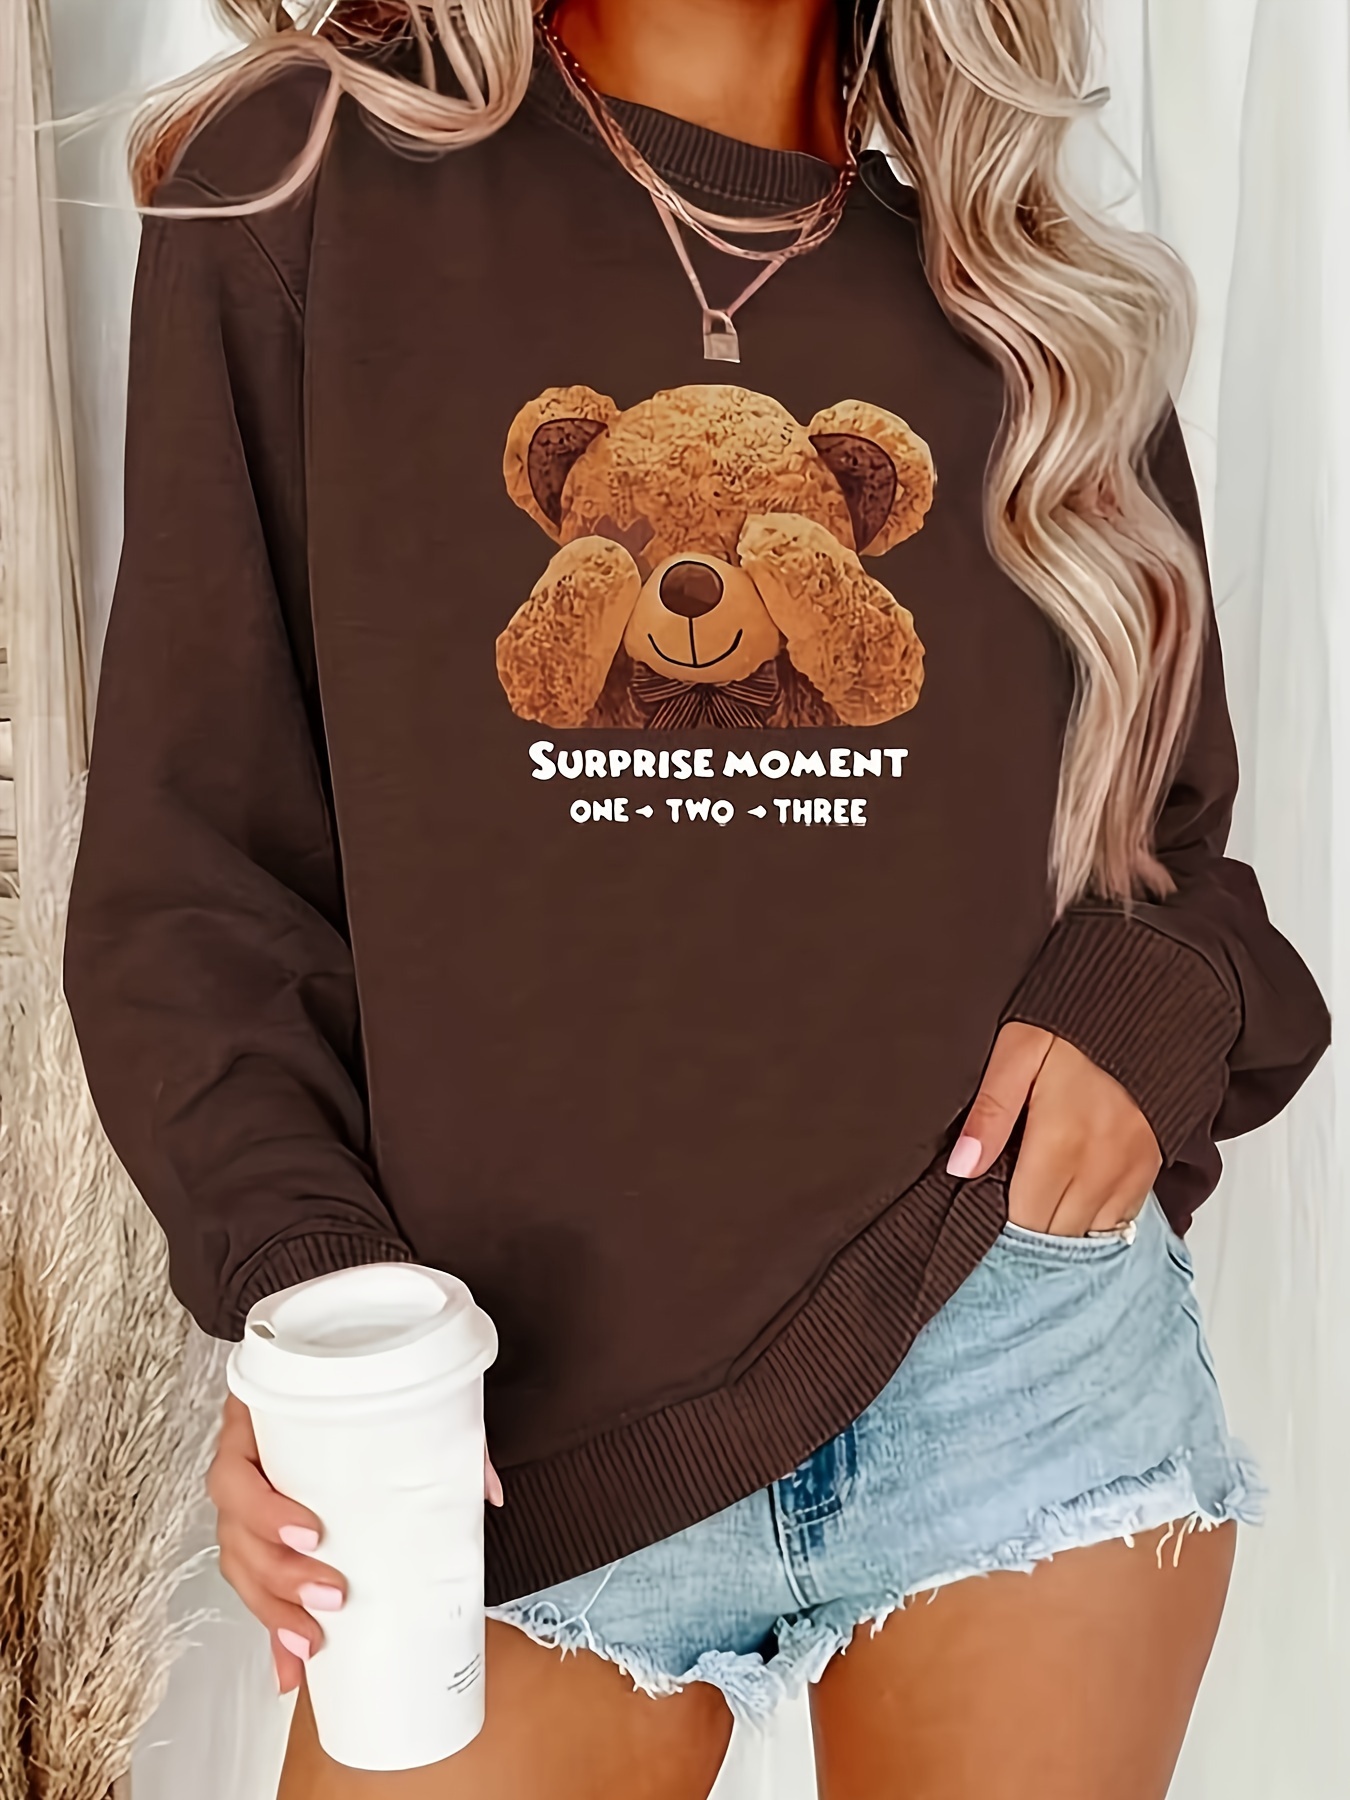 Only teddy sweater in brown